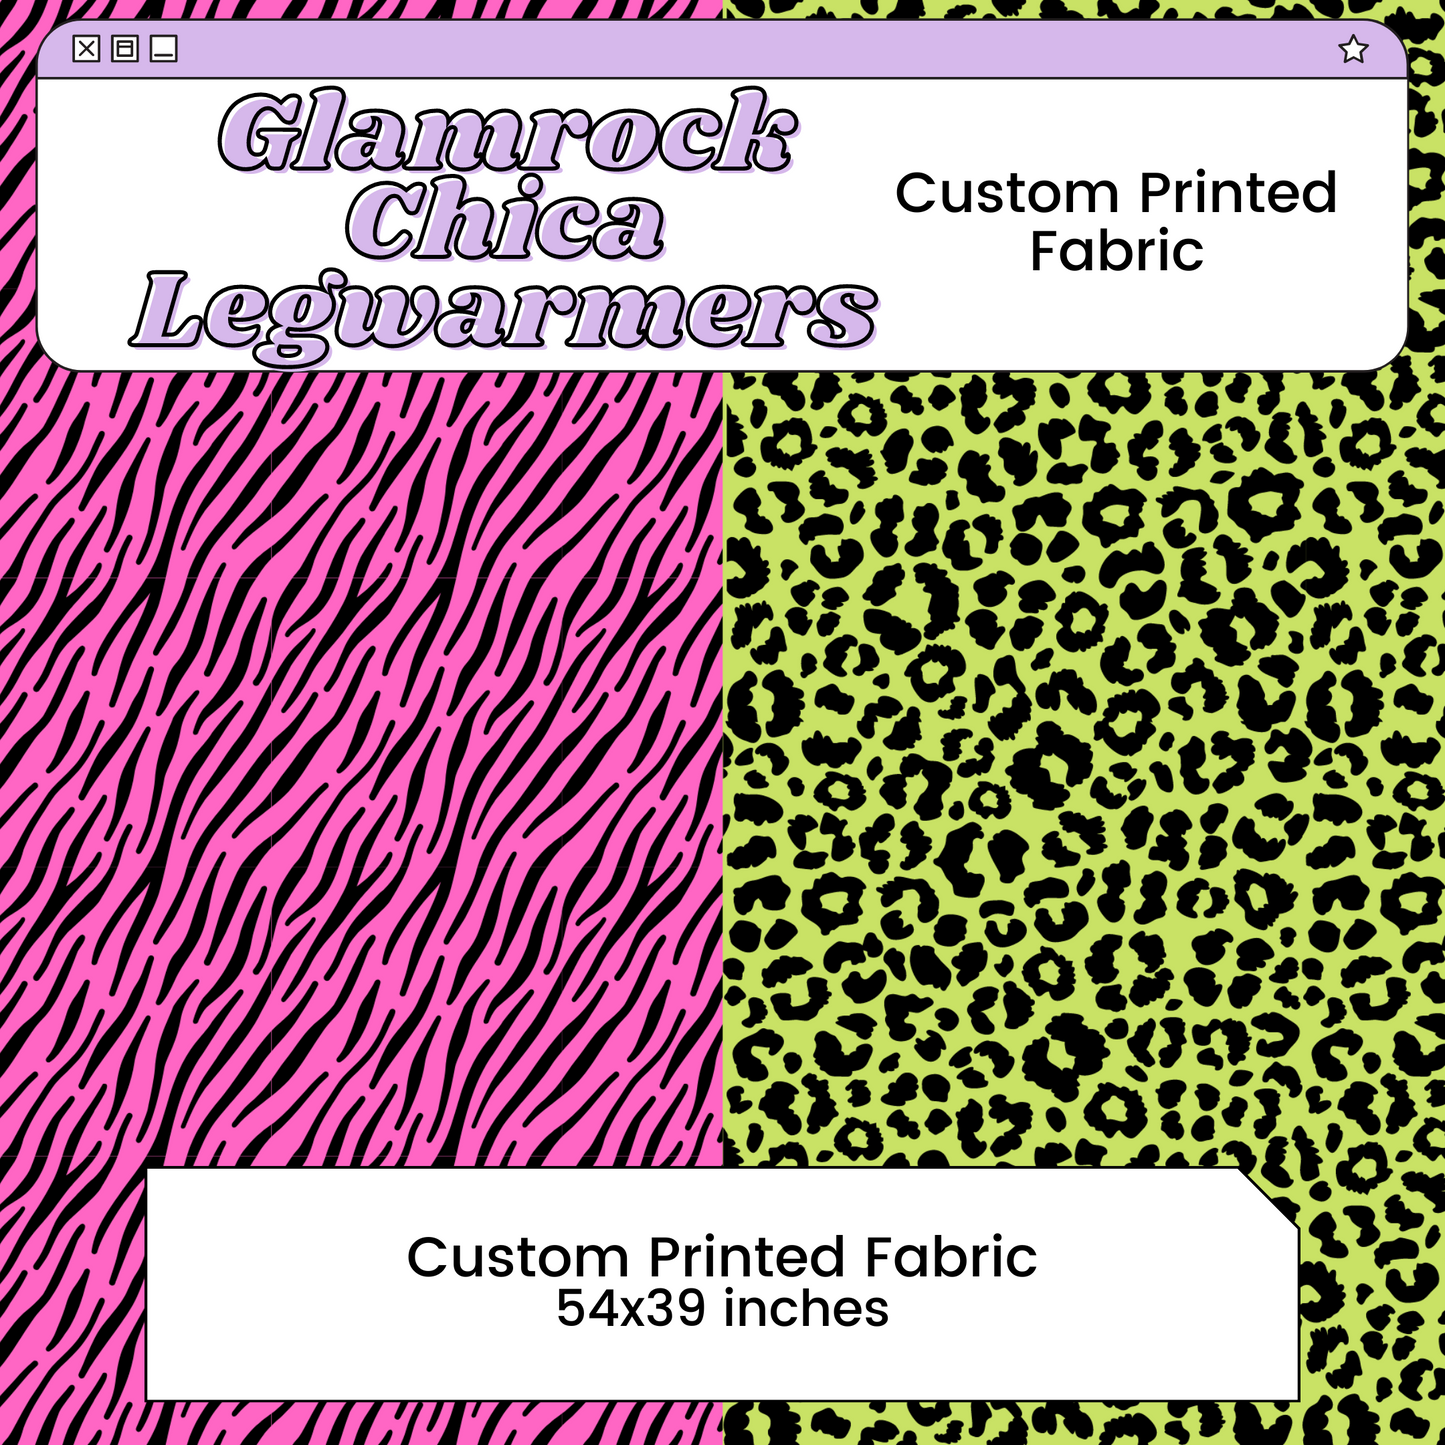 Glamrock Chica Legwarmers Custom Printed Cosplay Fabric | Inspired by Five Nights at Freddy's: Security Breach